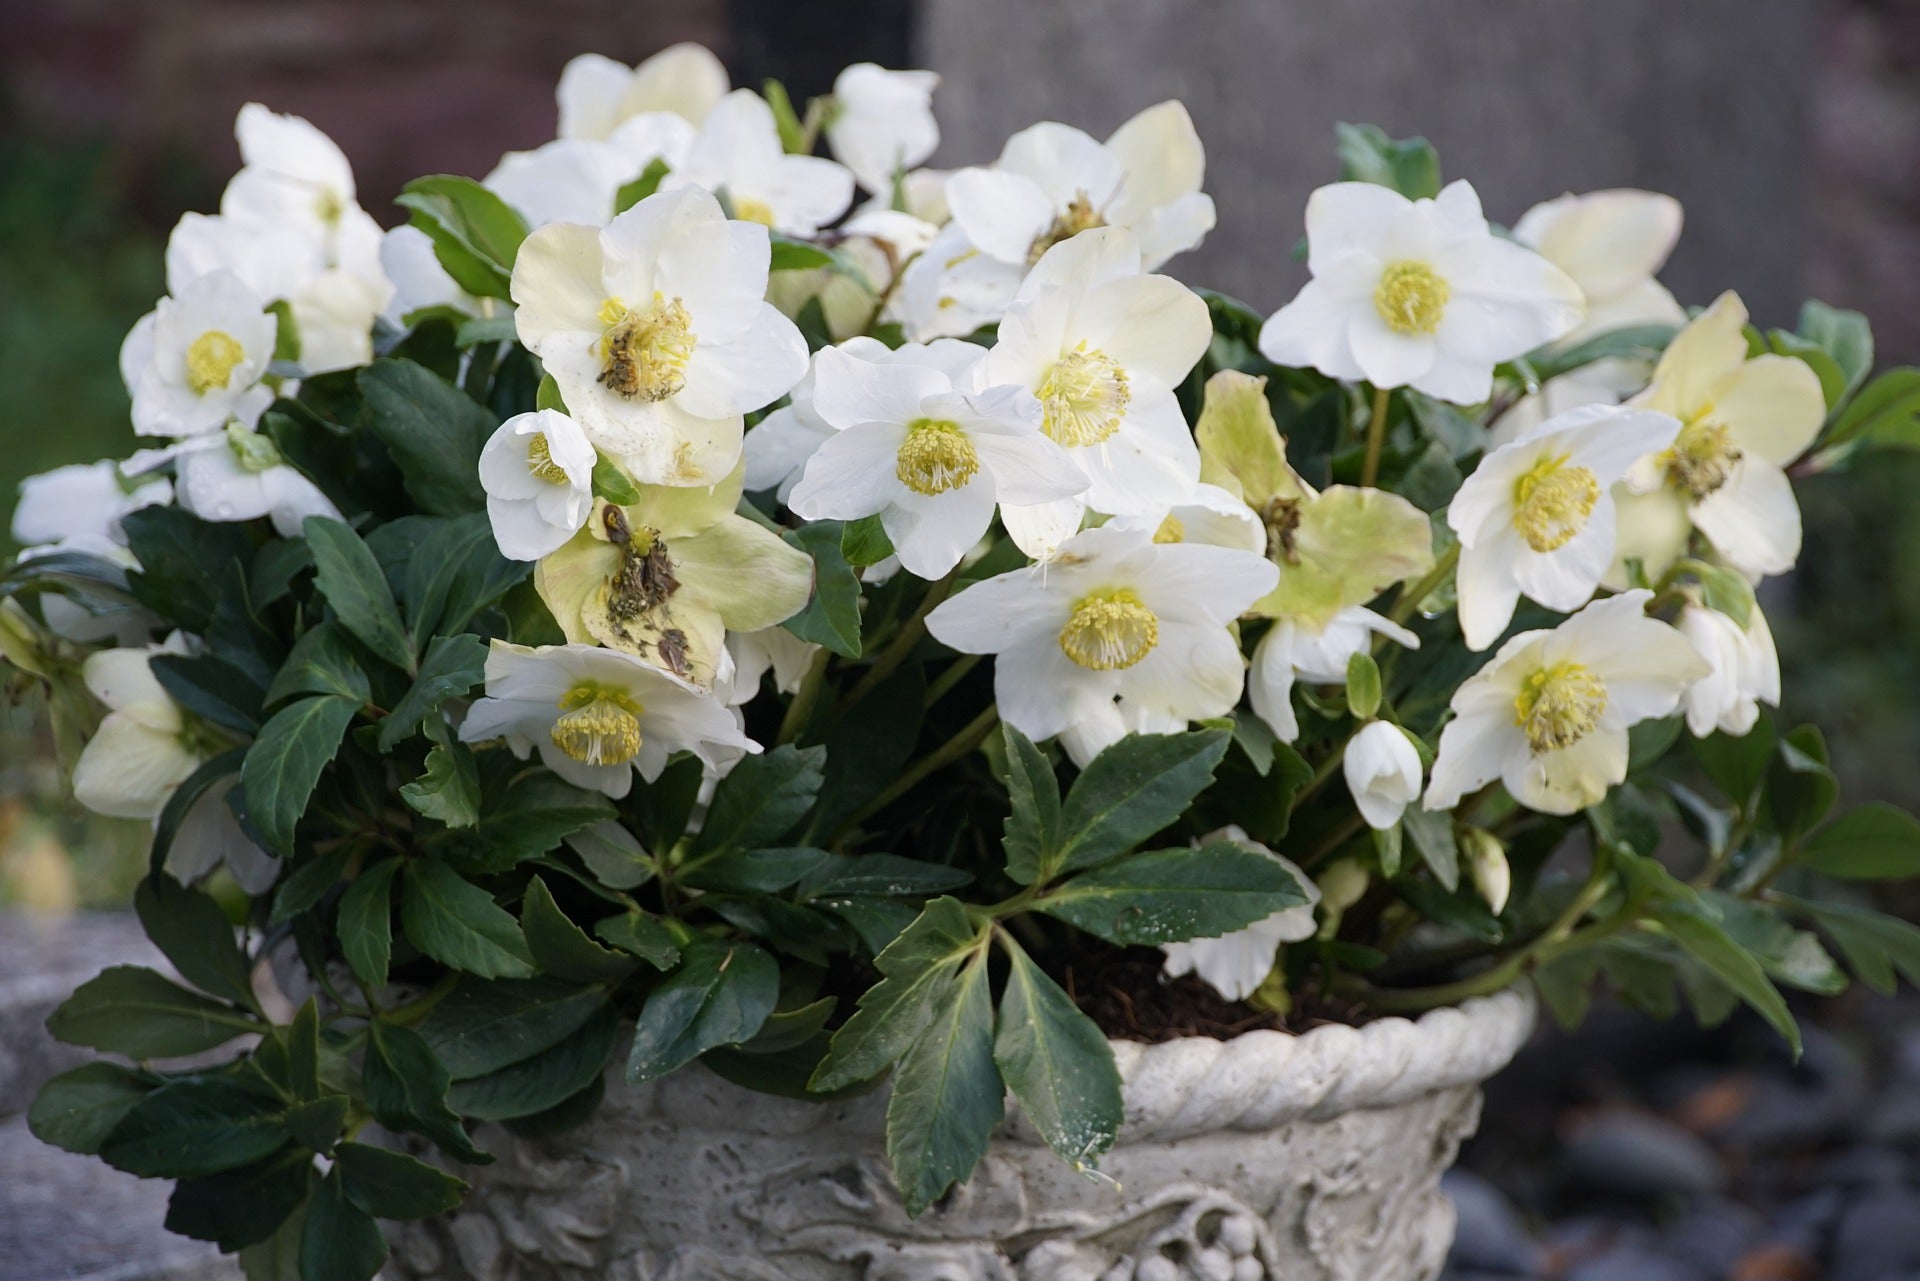 White Hellebore flowering in a planter